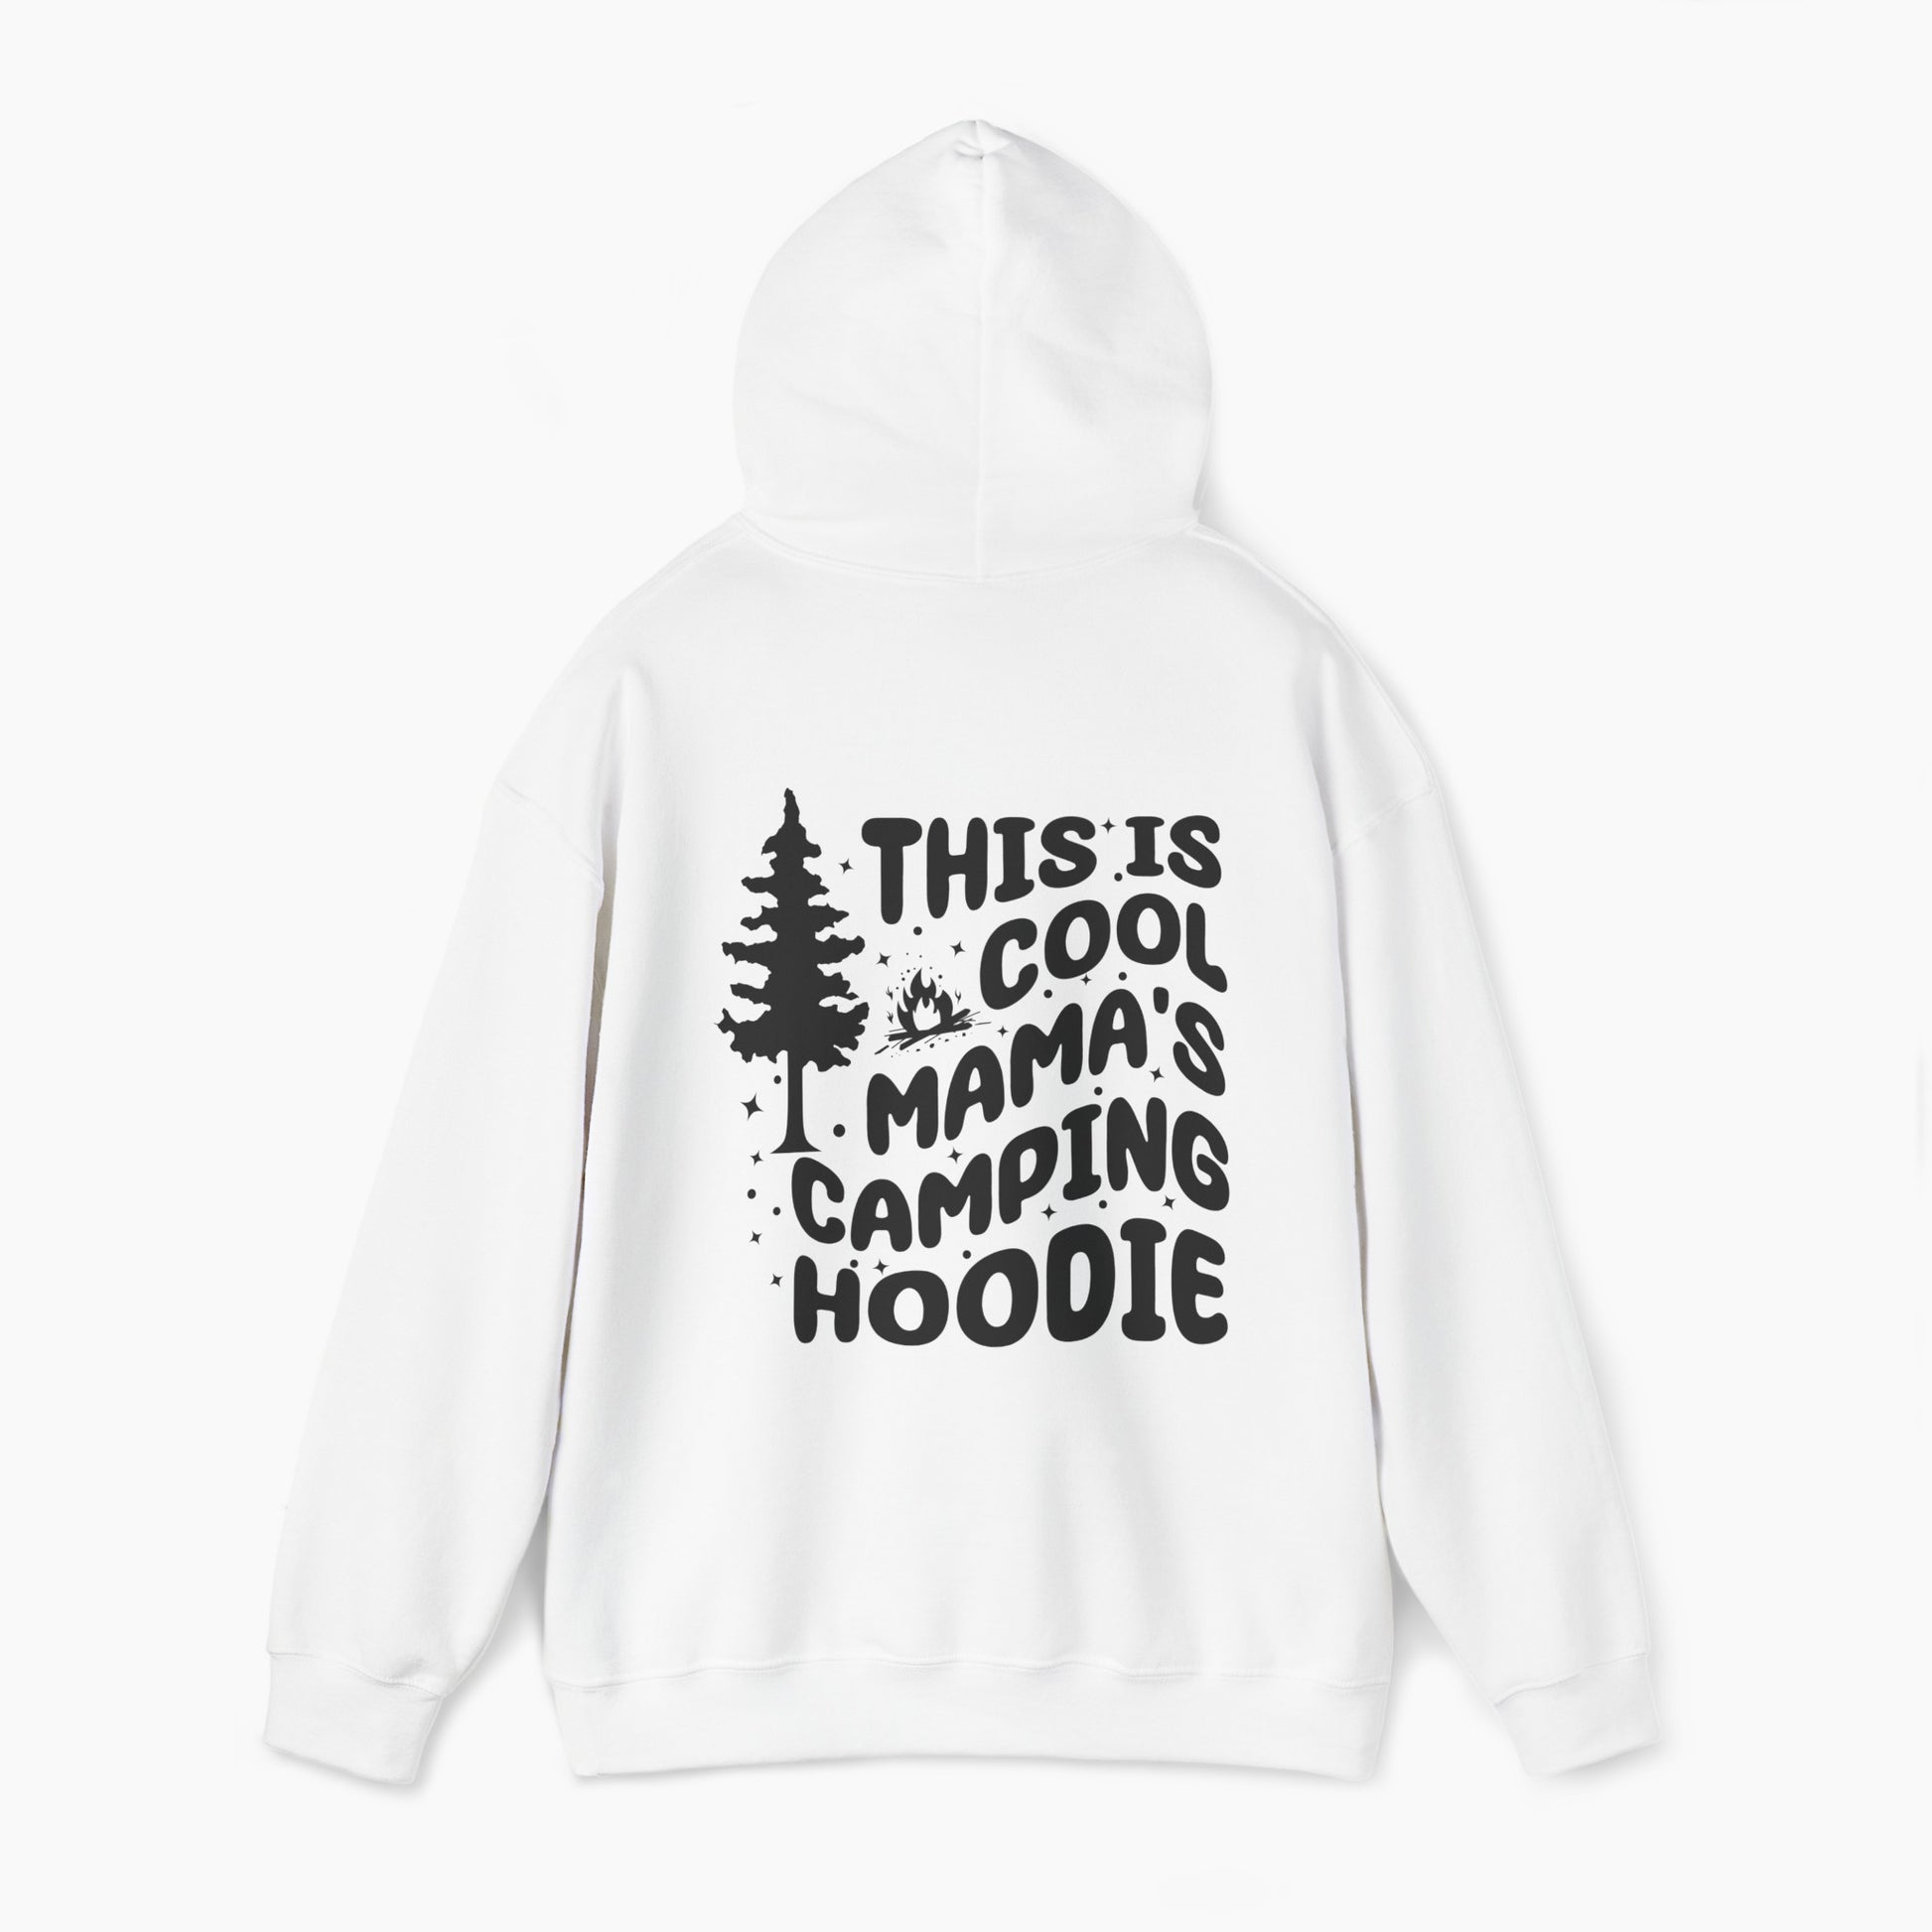 White hoodie with the text 'This is cool mama's camping hoodie' on the back, featuring a tree and stars design on a plain background.